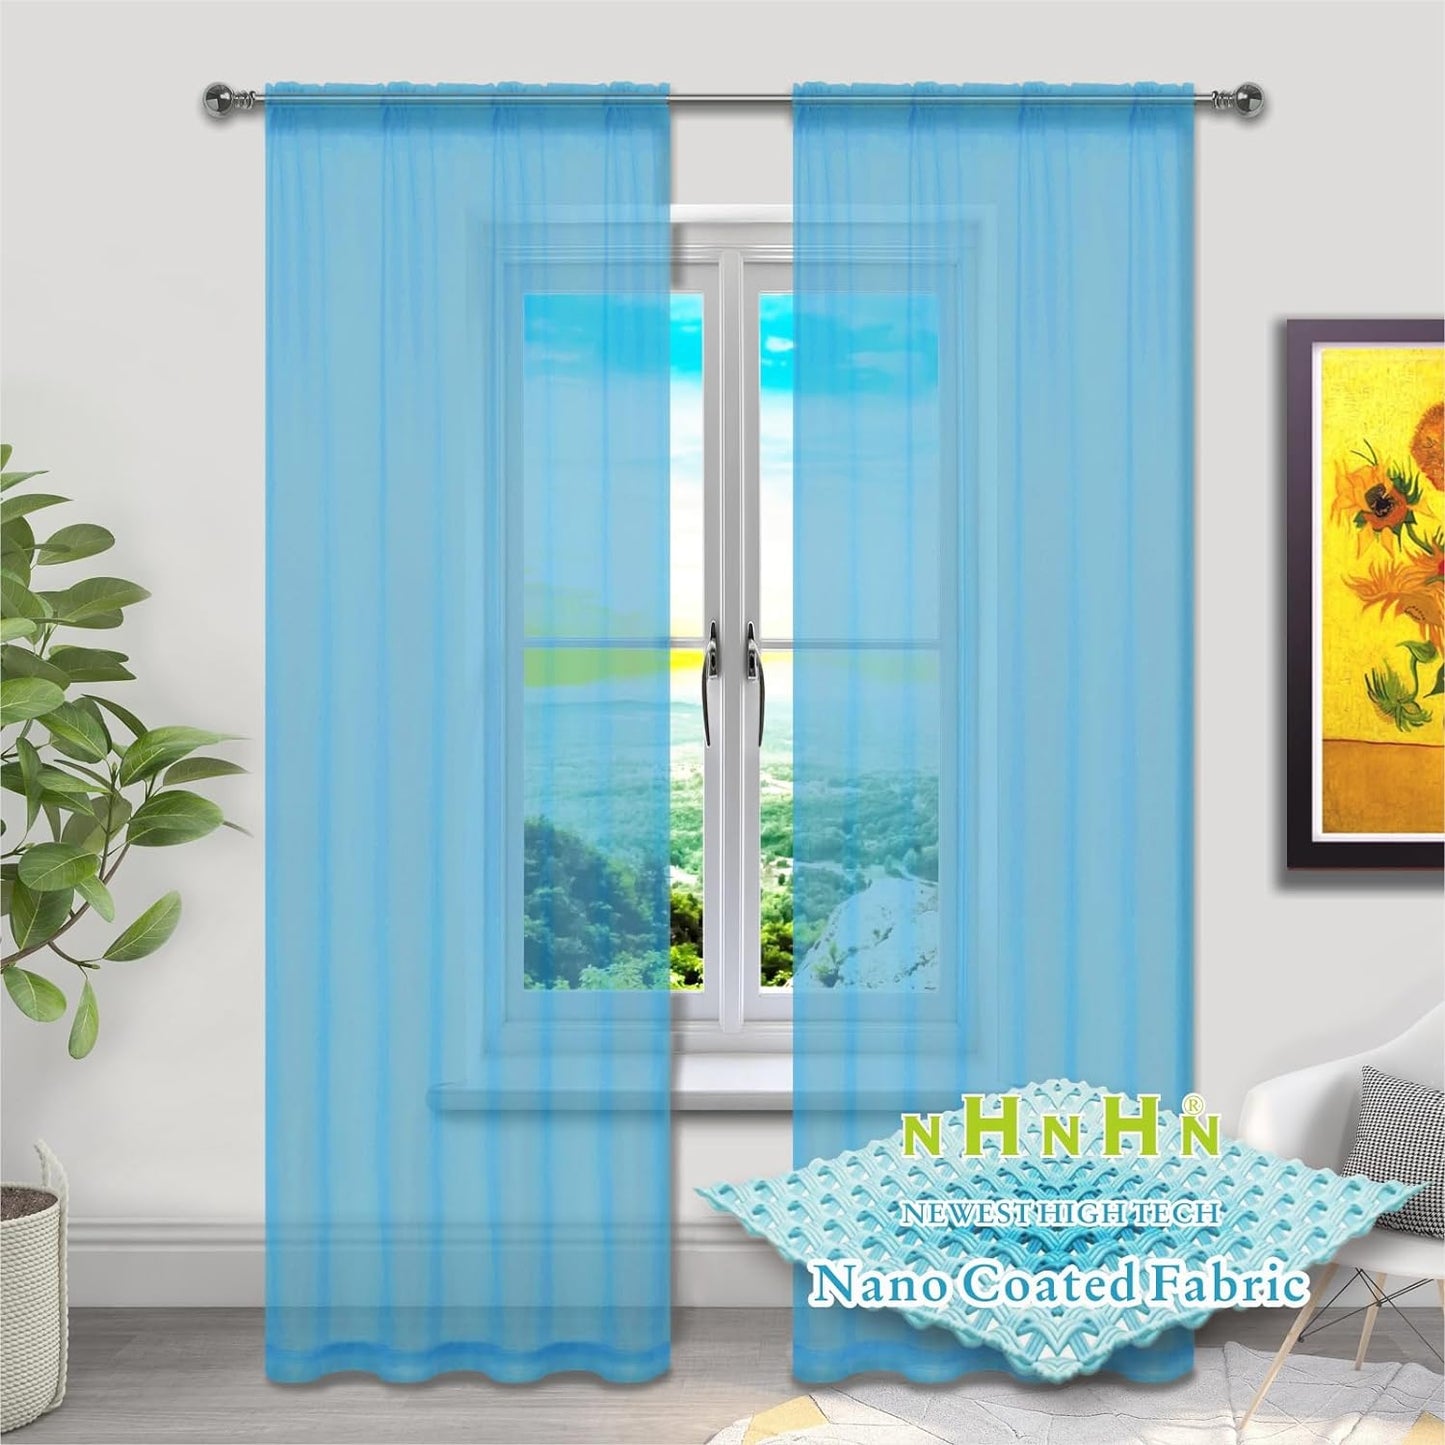 Nano Material Coated White Sheer Curtains 72 Inches Long, Rod Pocket Window Drapes Voile Sheer Curtain 2 Panels for Living Room Bedroom Kitchen (White, W52 X L72)  NHNHN Light Blue 52W X 72L | 2 Panels 